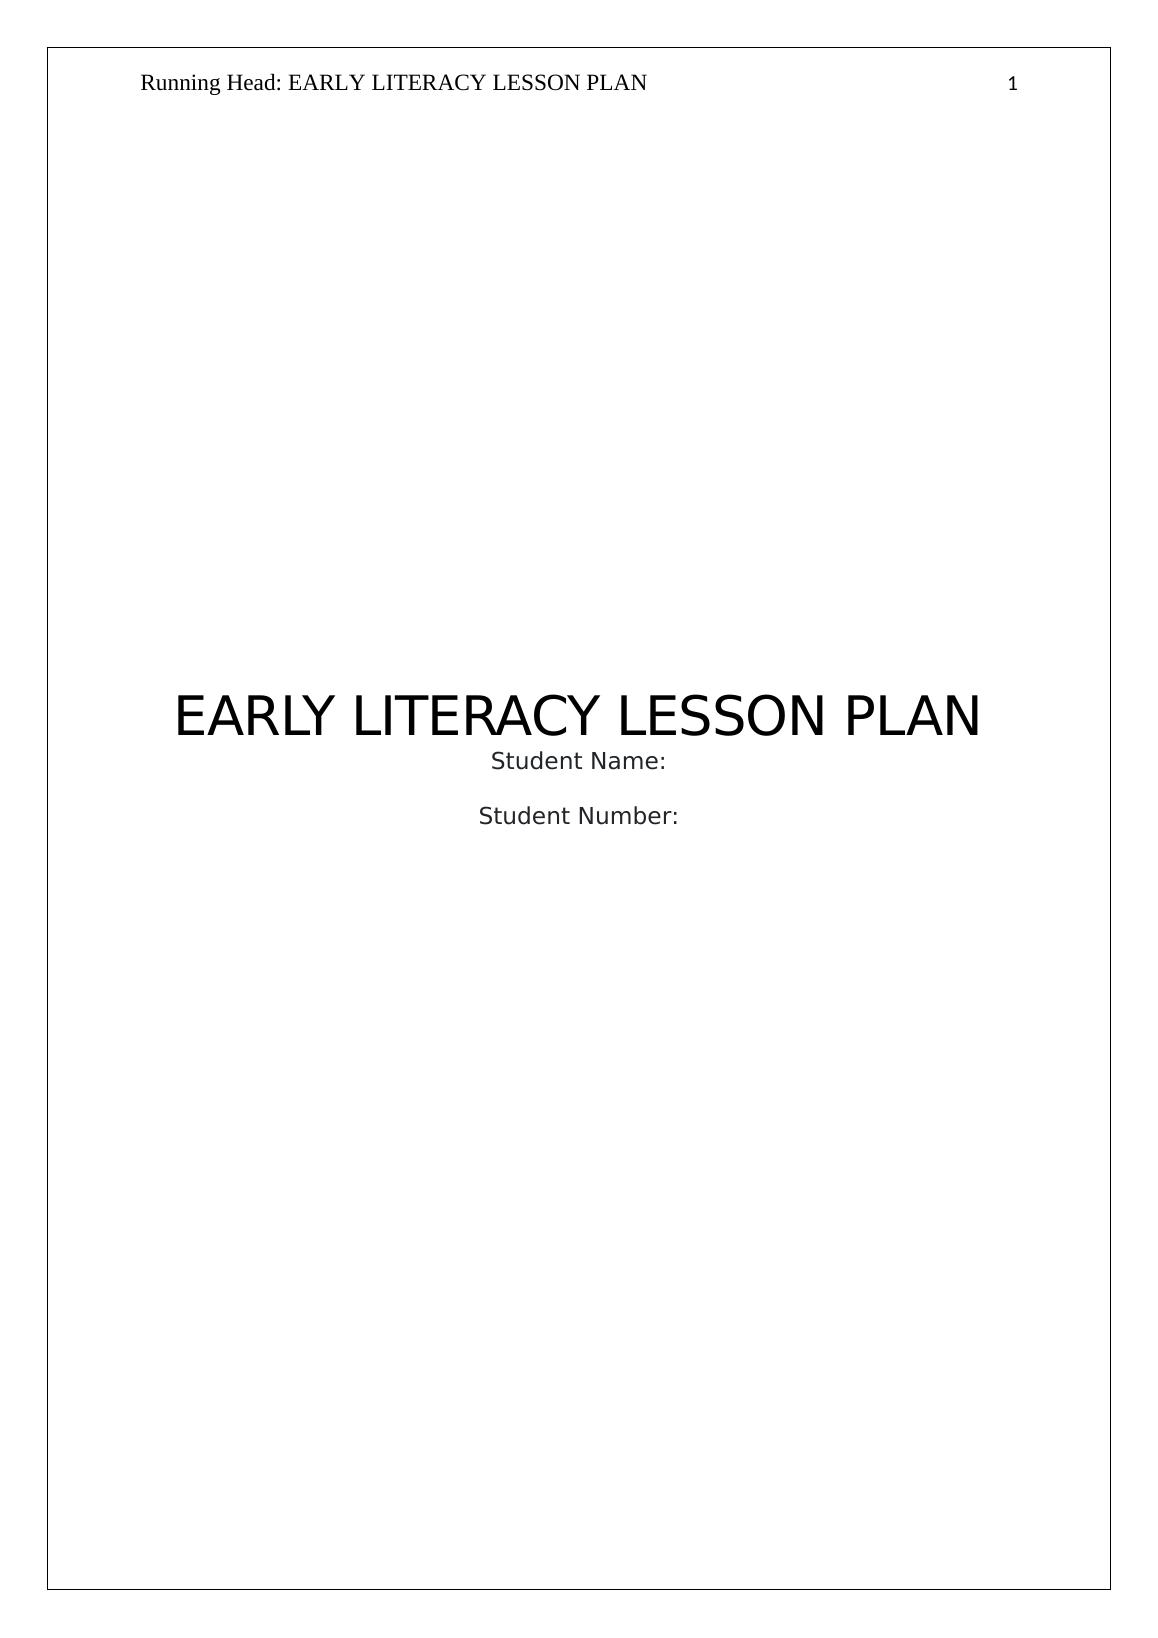 Early Literacy Lesson Plans & Worksheets_1